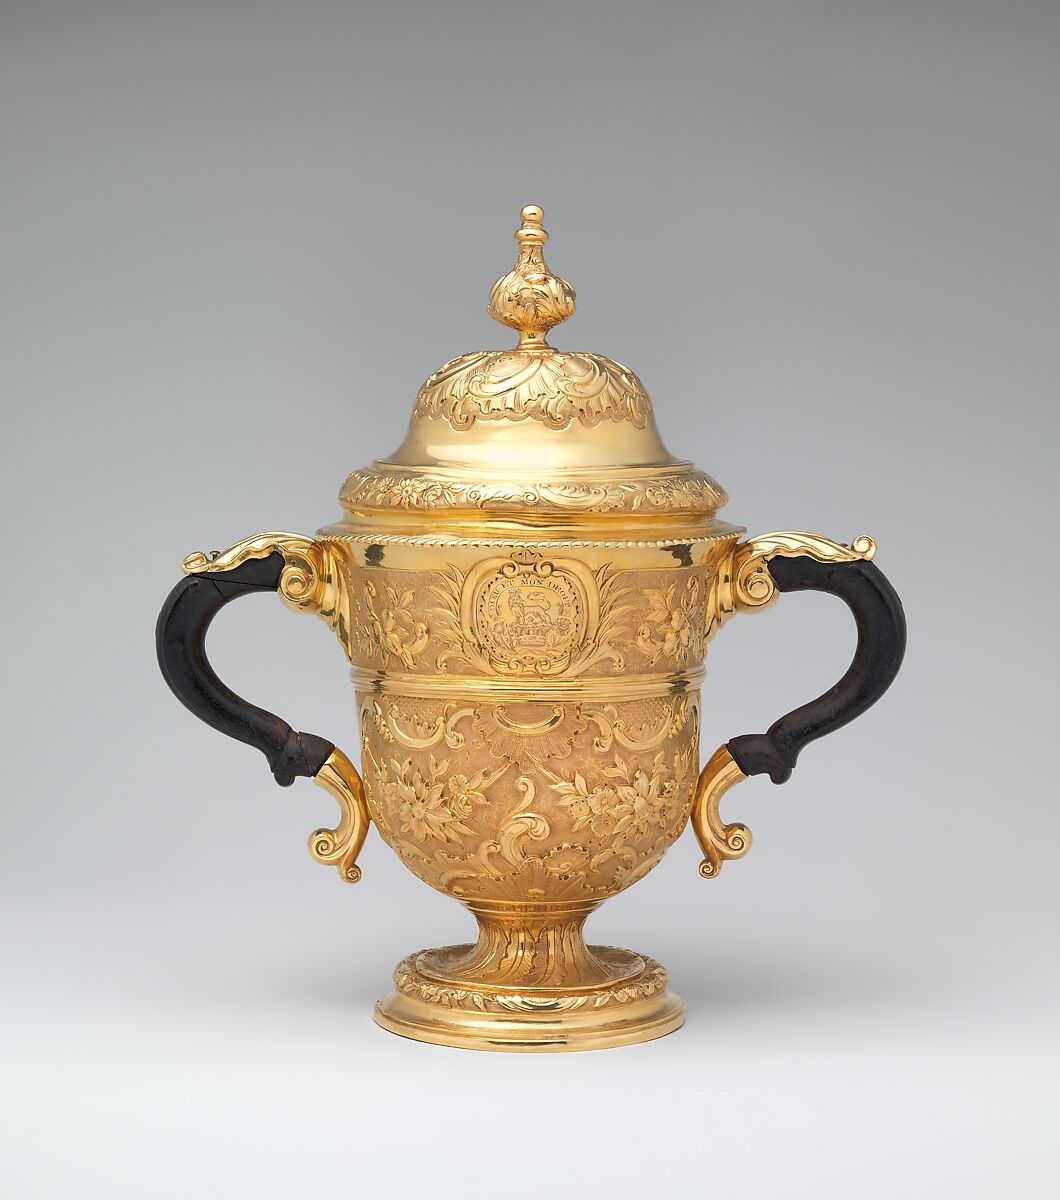 Two-handled cup with cover, William Gilchrist (Scottish, active 1736), Gold, ebony, Scottish, Edinburgh 